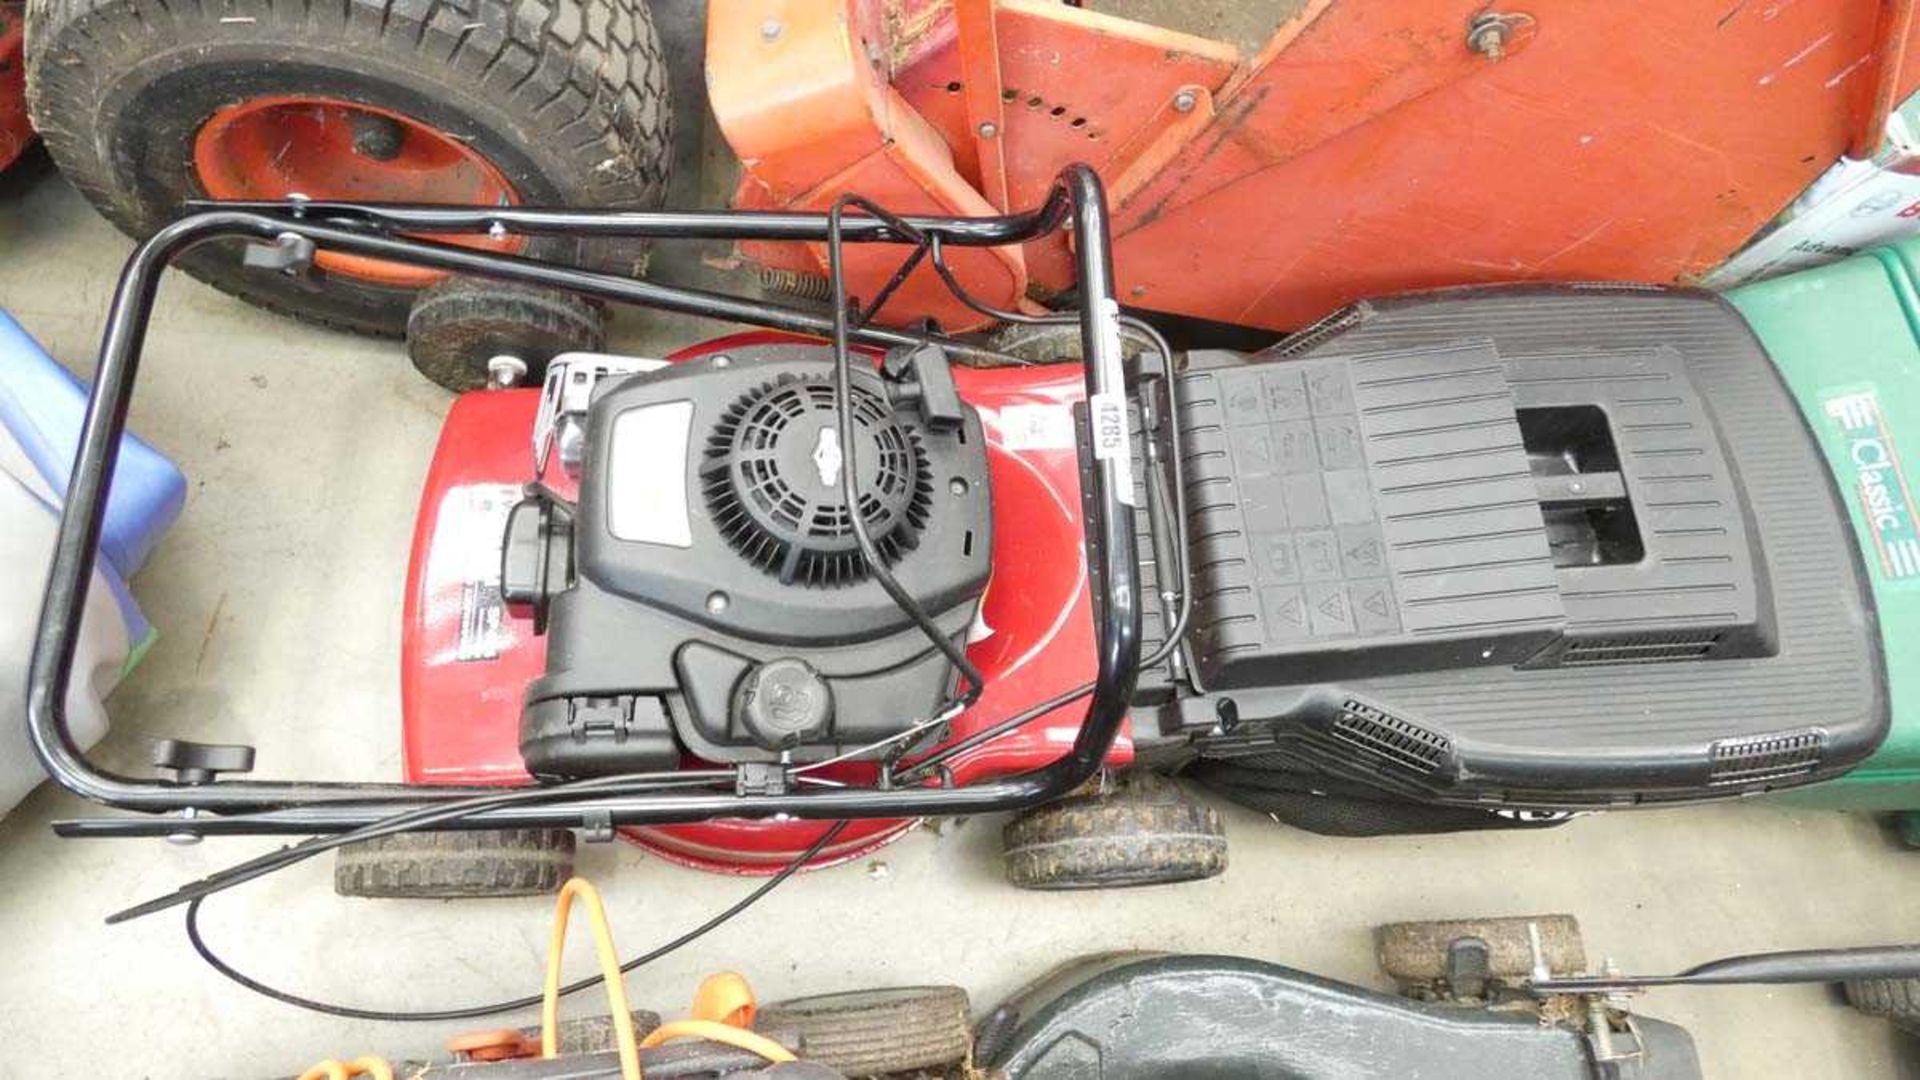 Petrol powered Mountfield rotary lawn mower with grass box